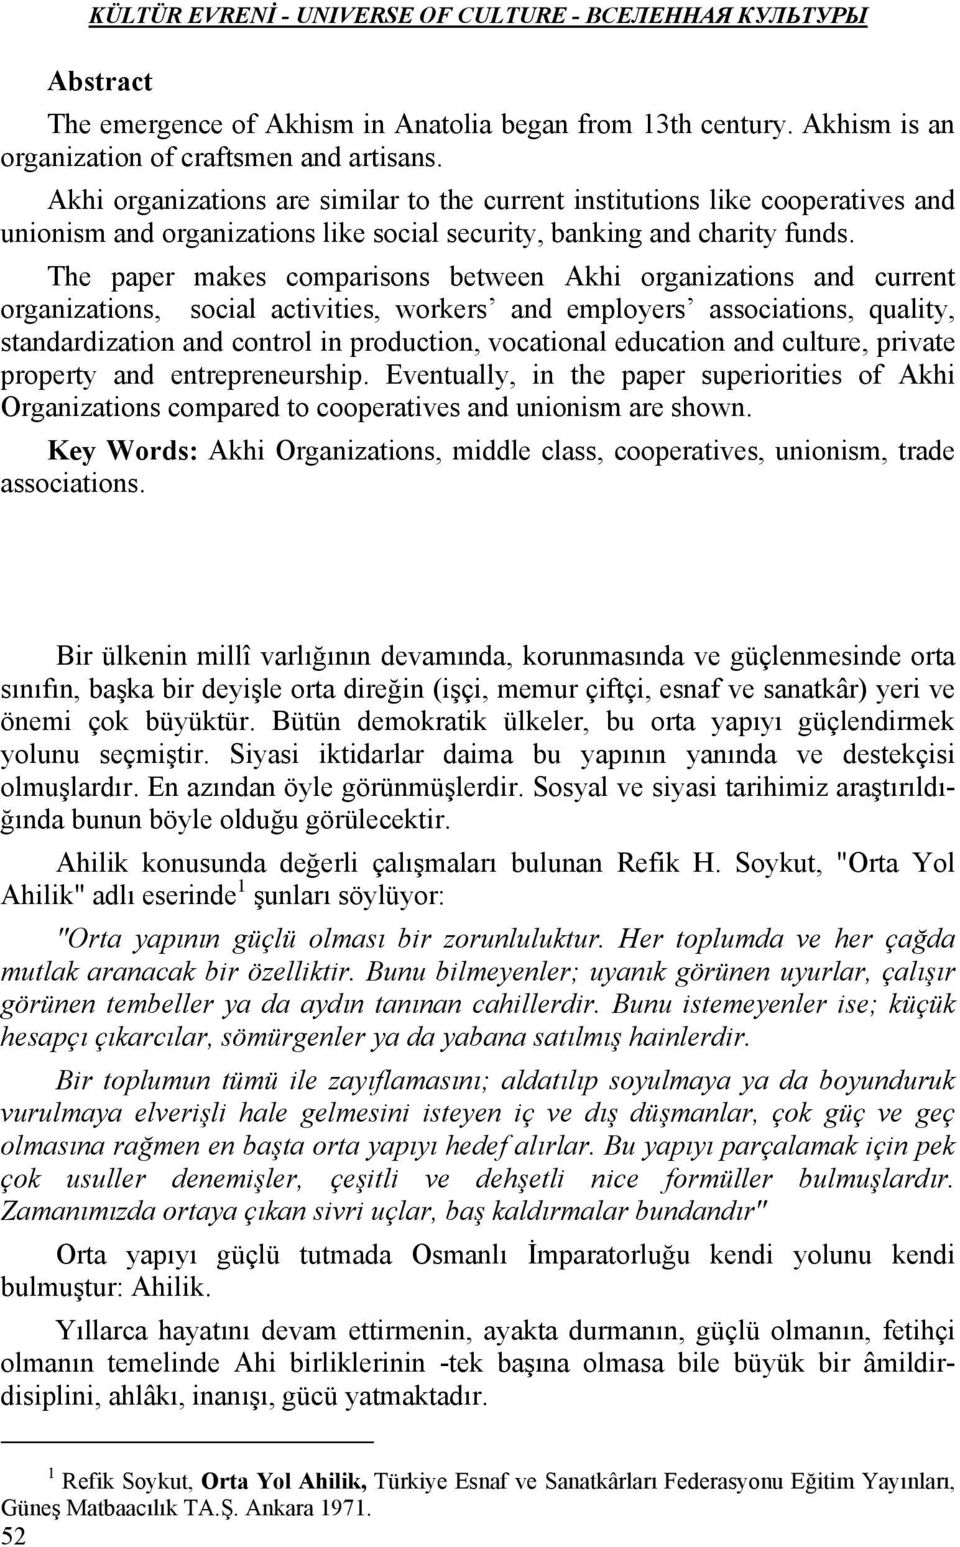 The paper makes comparisons between Akhi organizations and current organizations, social activities, workers and employers associations, quality, standardization and control in production, vocational